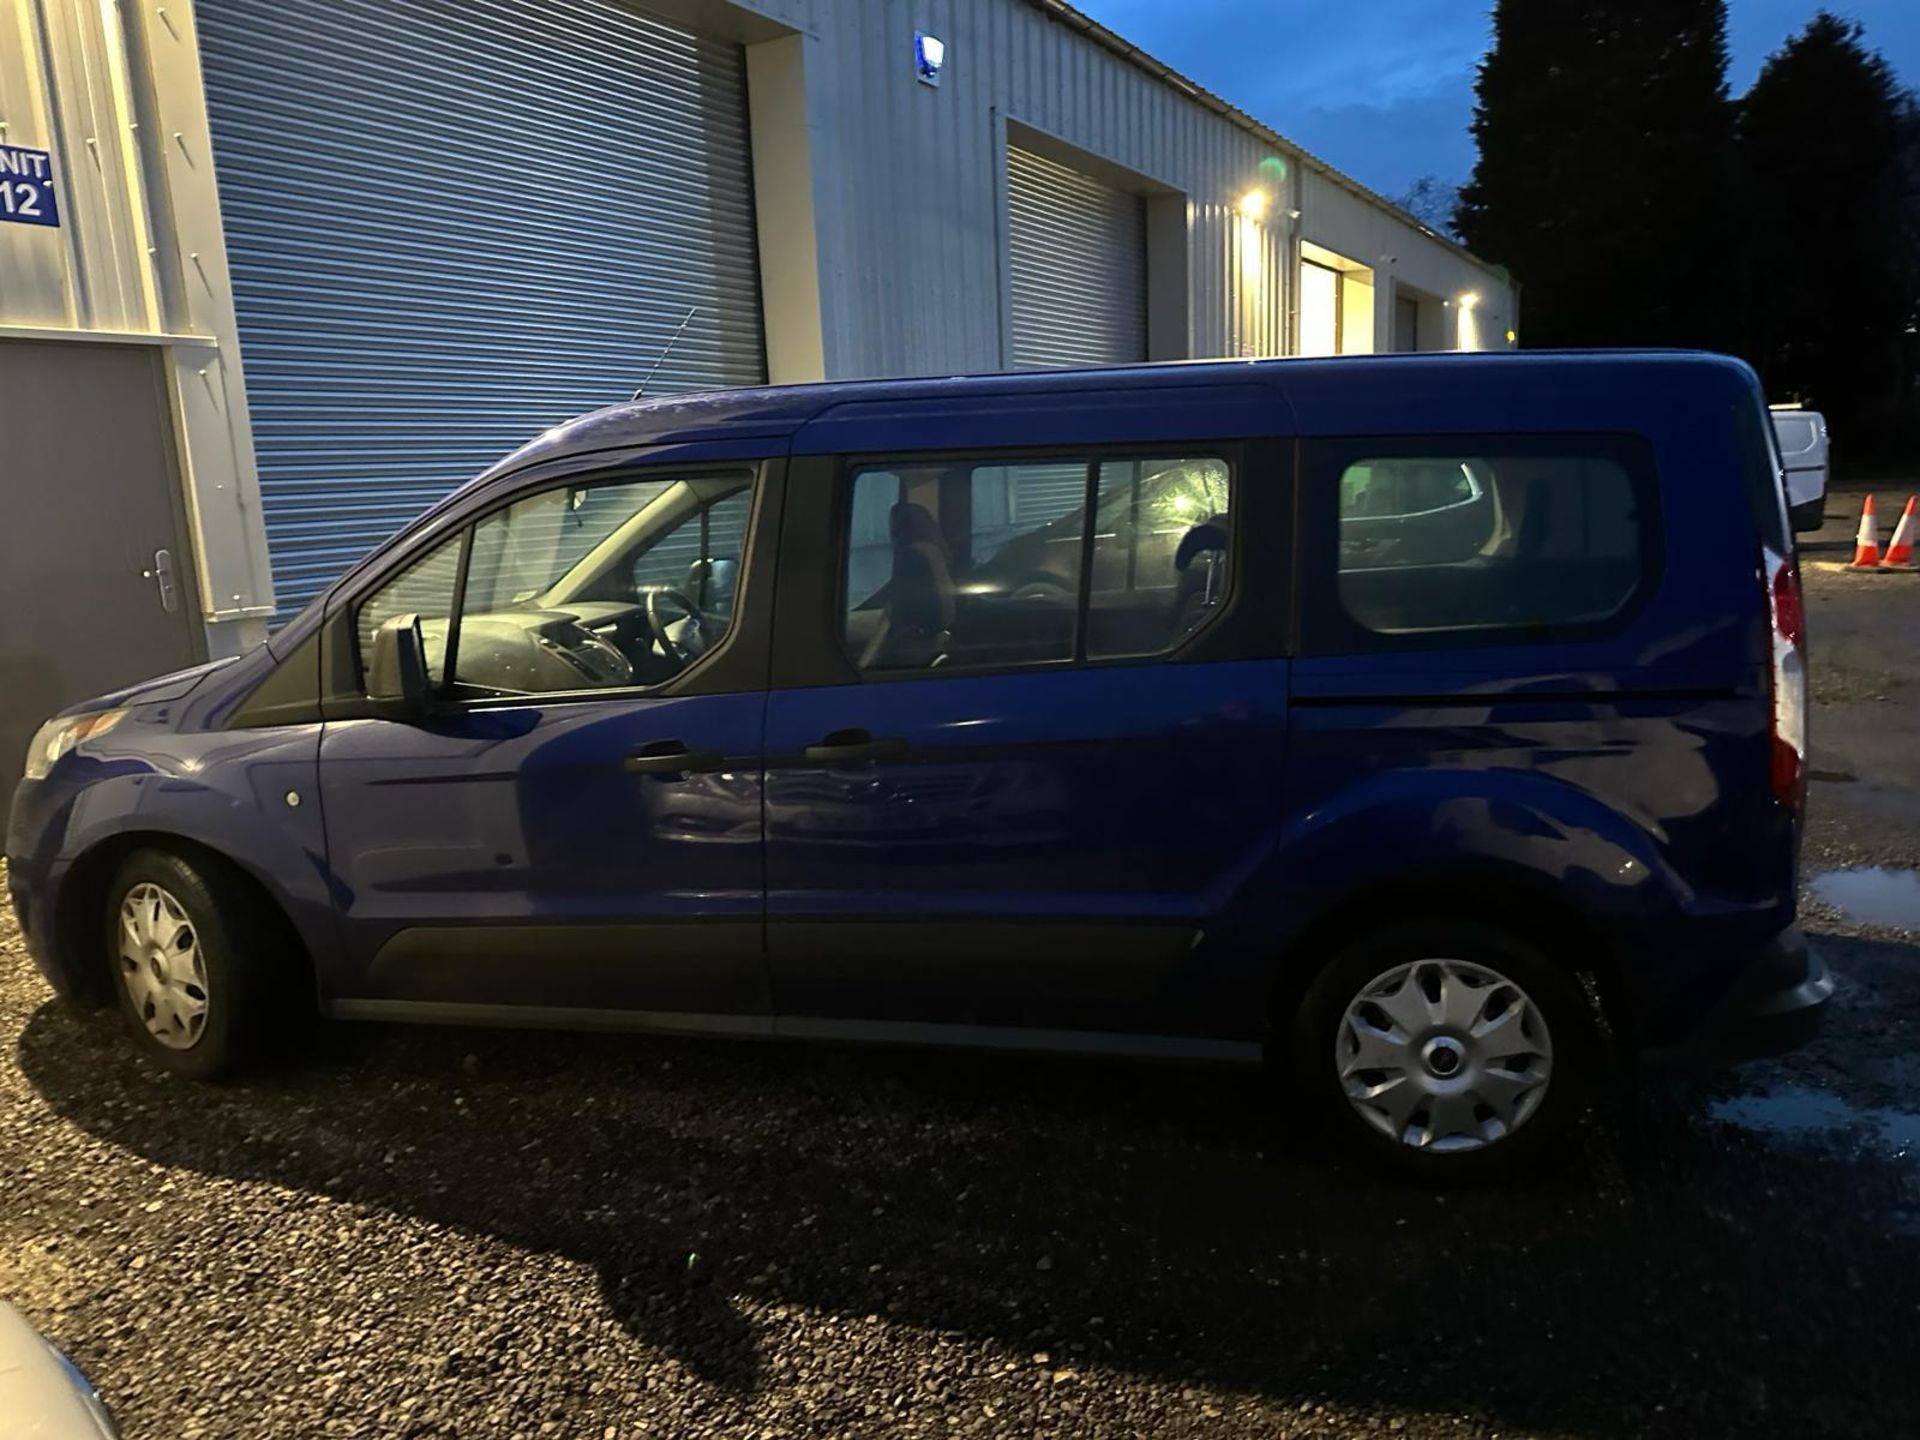 2017 17 FORD TRANSIT CONNECT TOURNEO VAN - 196K MILES - EURO 6 - NO DRIVE. - Image 5 of 8